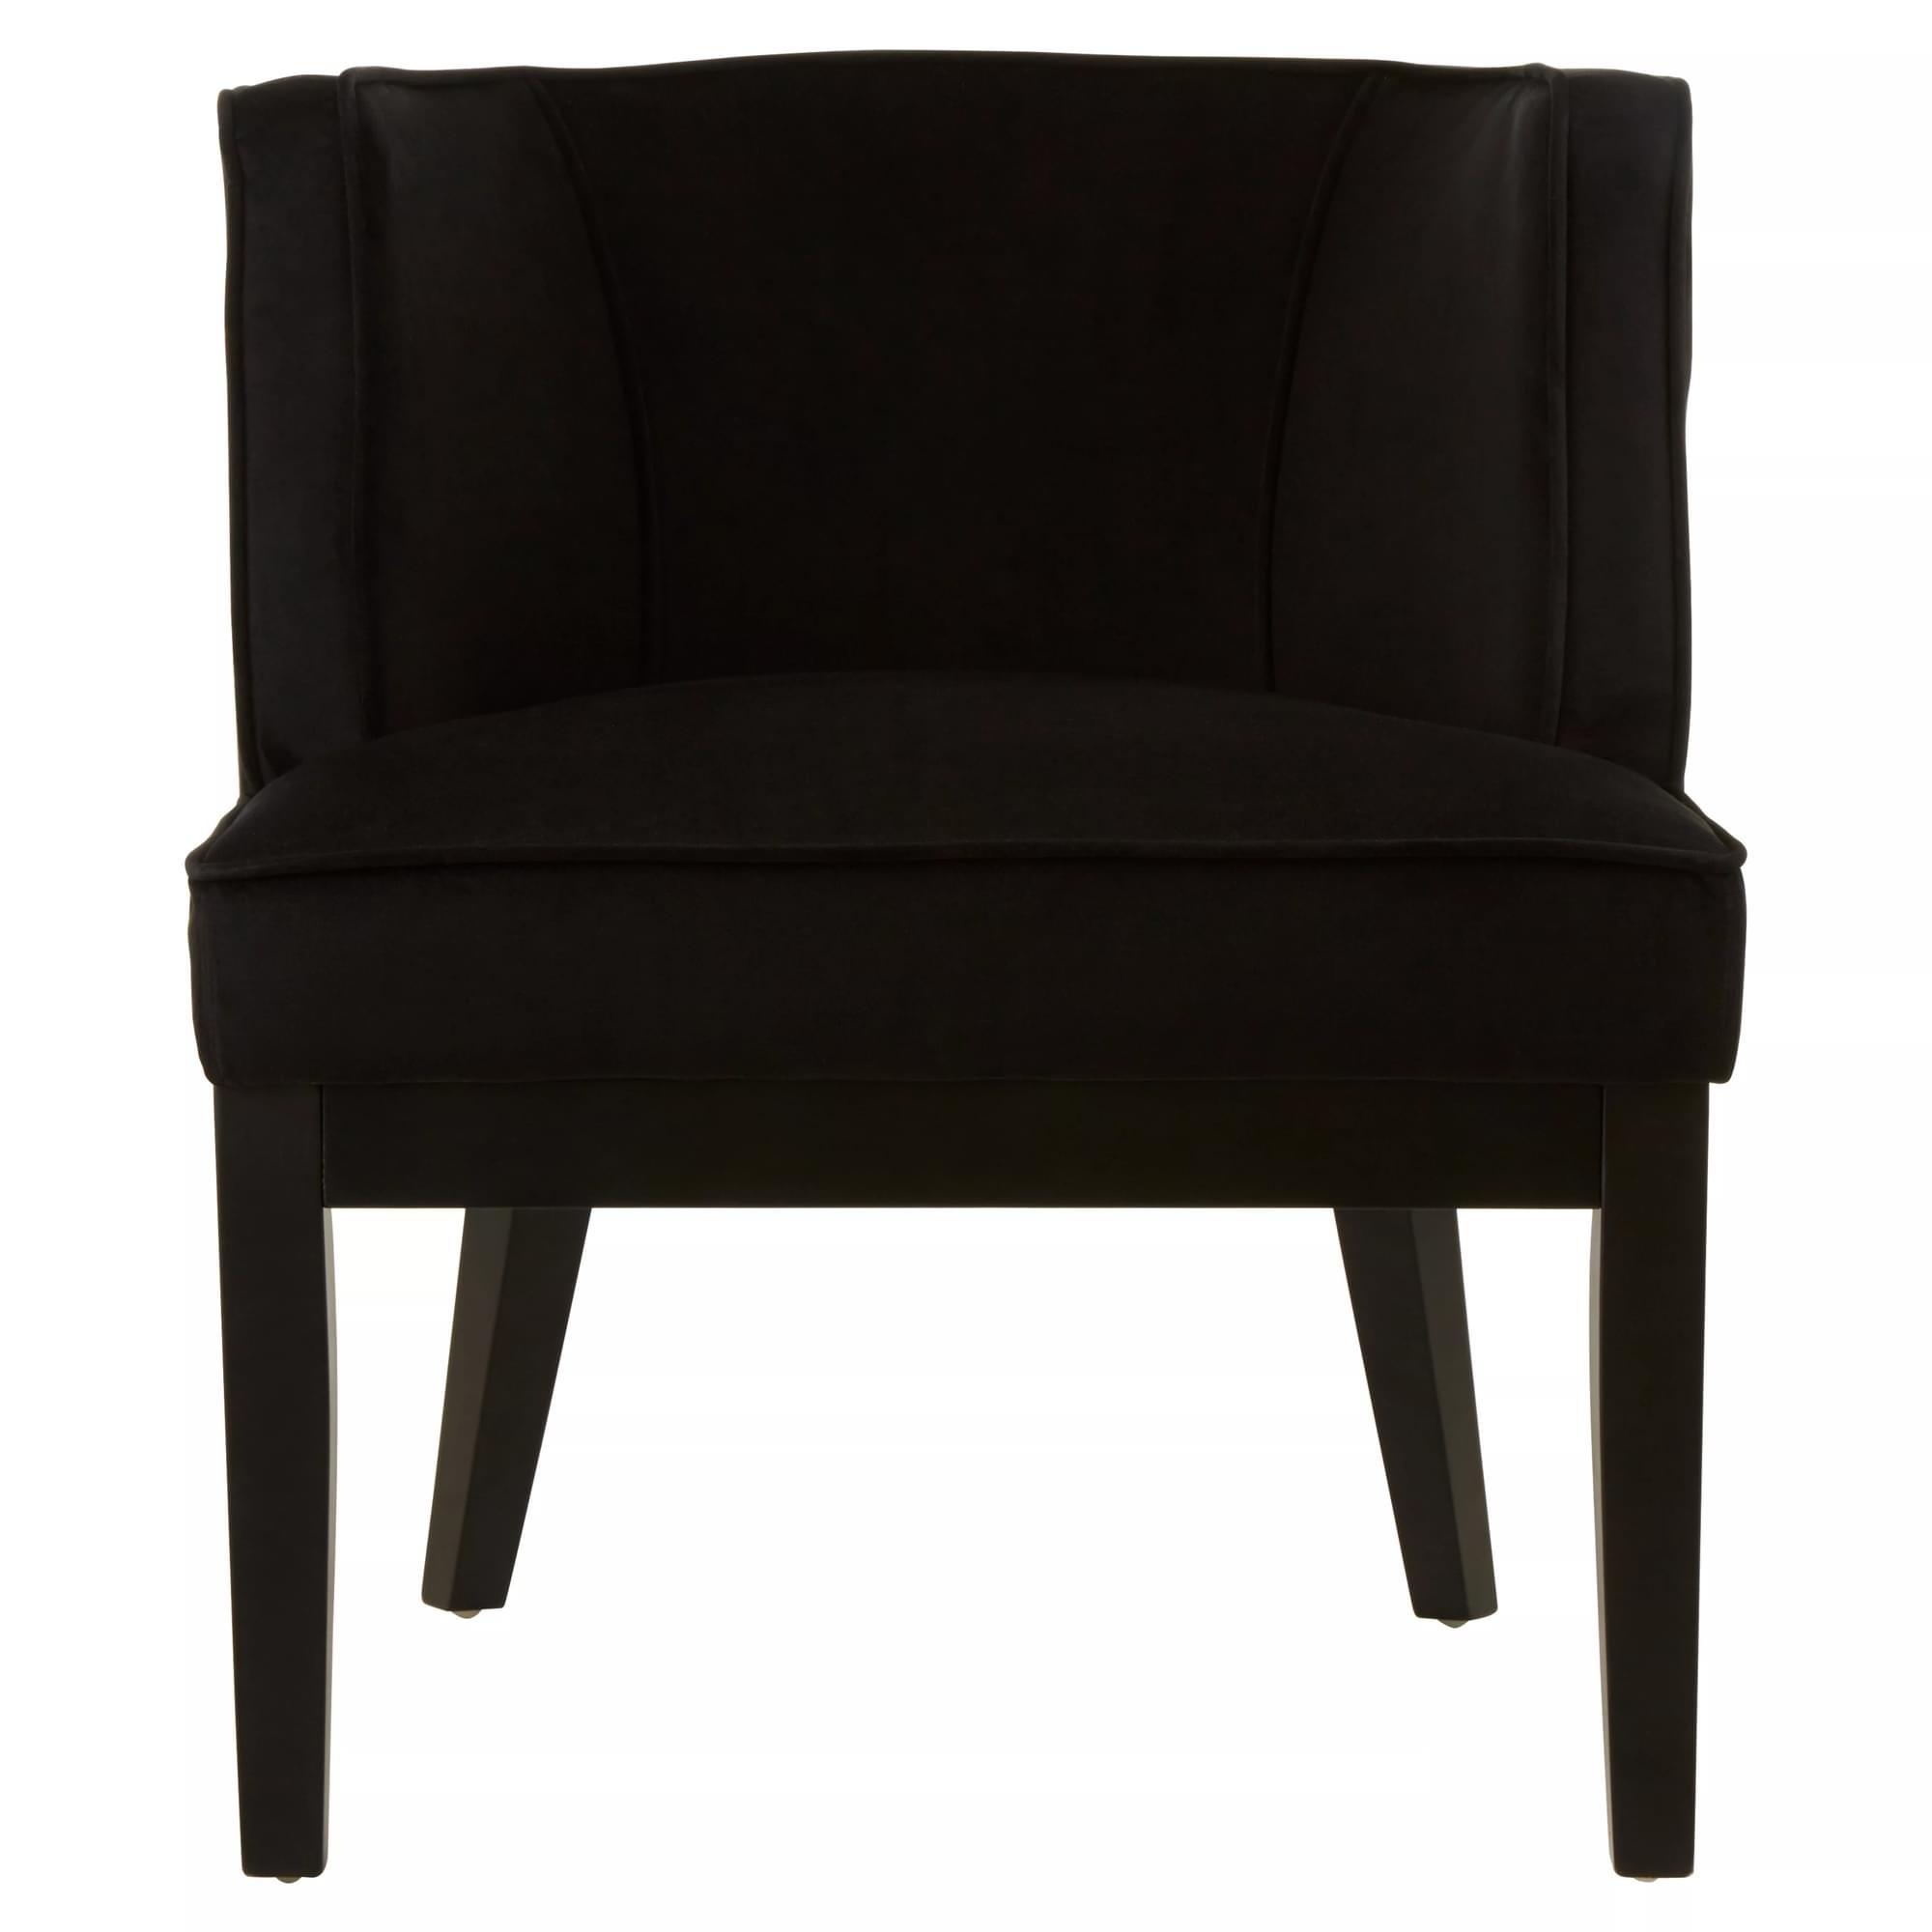 Interiors by Premier Daxton Velvet Rounded Chair